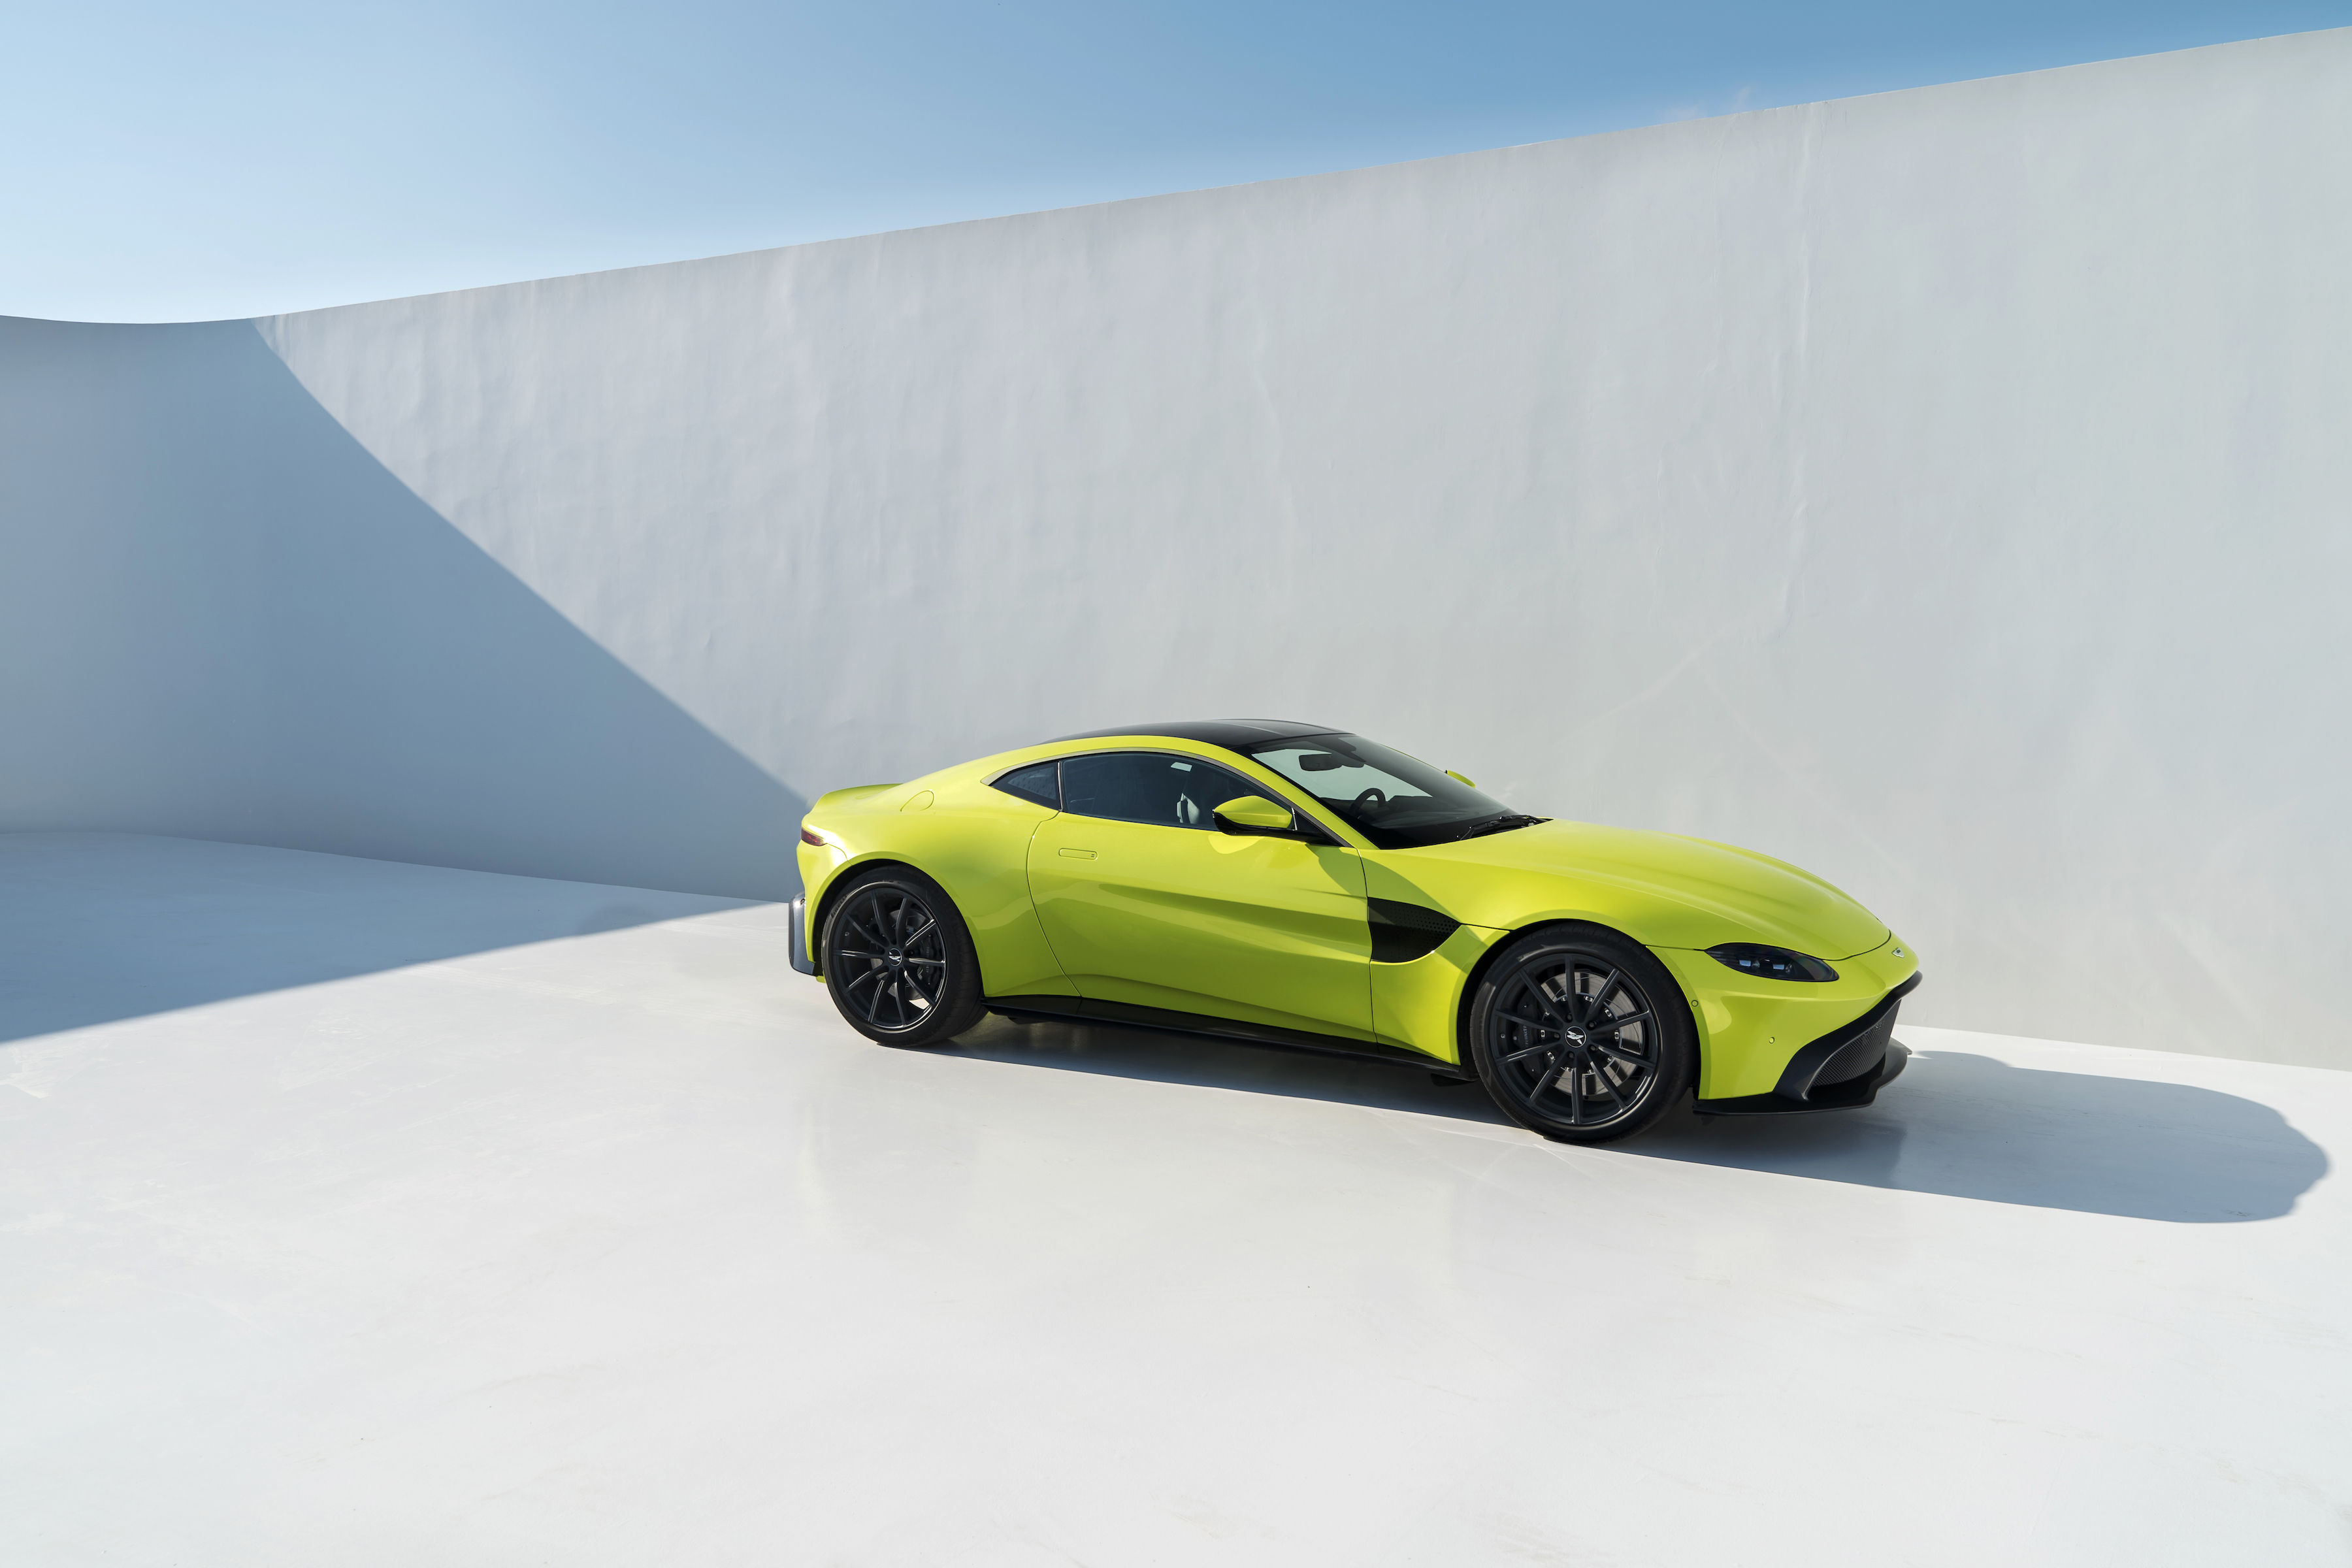 Aston Martin’s New Vantage Is A Force To Be Reckoned With